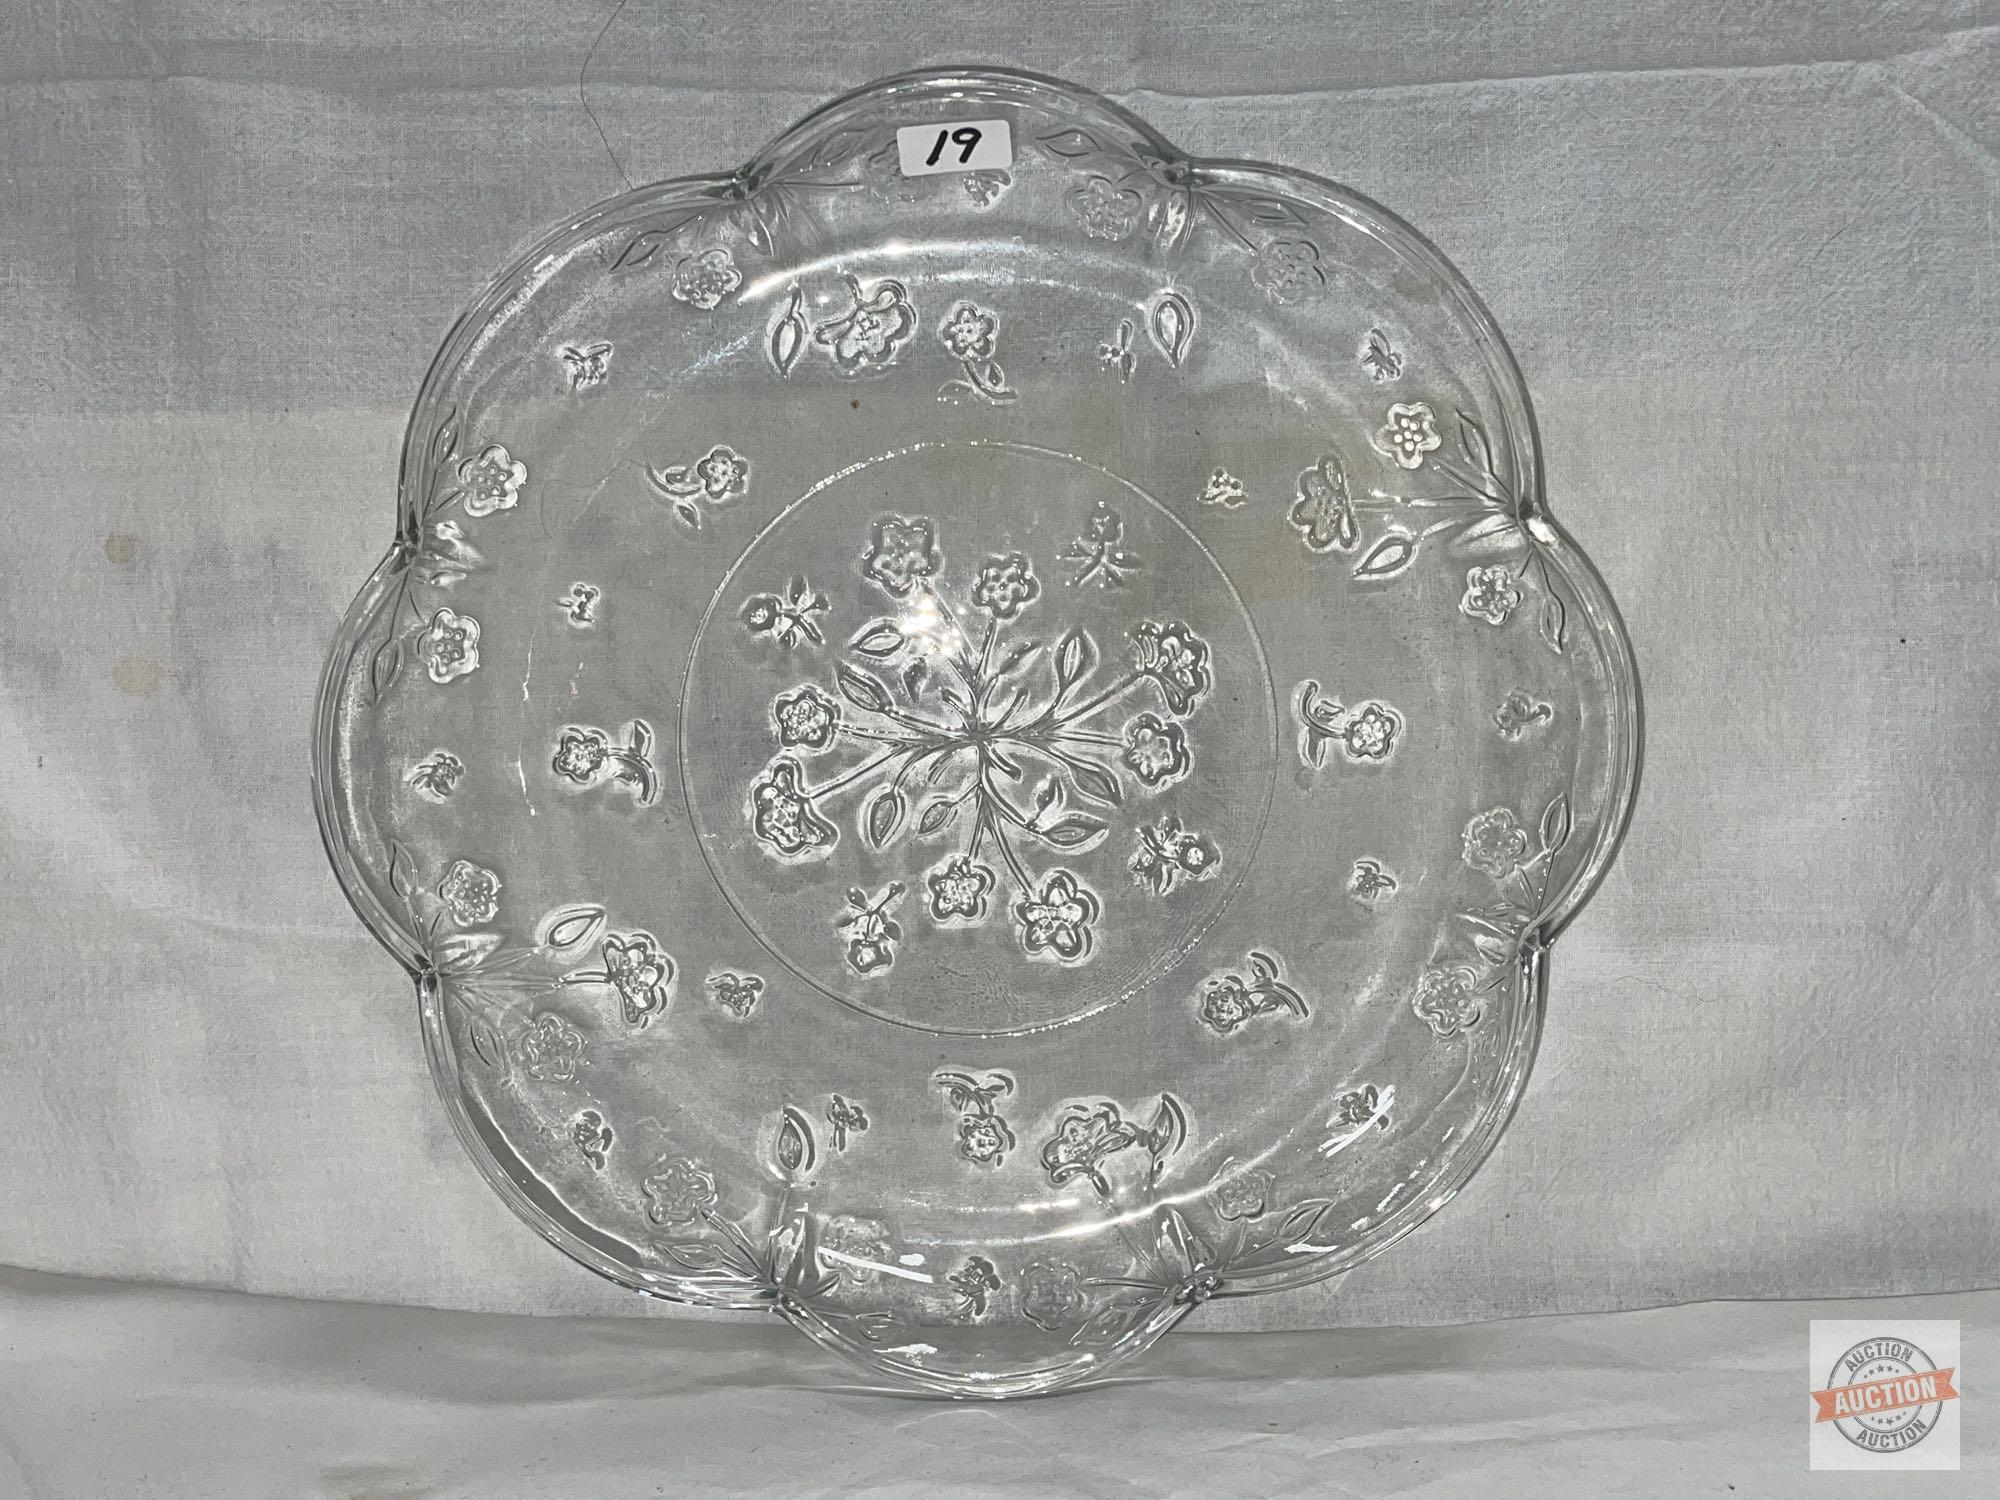 Glassware - Dish ware - 2 round serving platters, emossed designs, 12"w floral & 13"w Christmas Tree